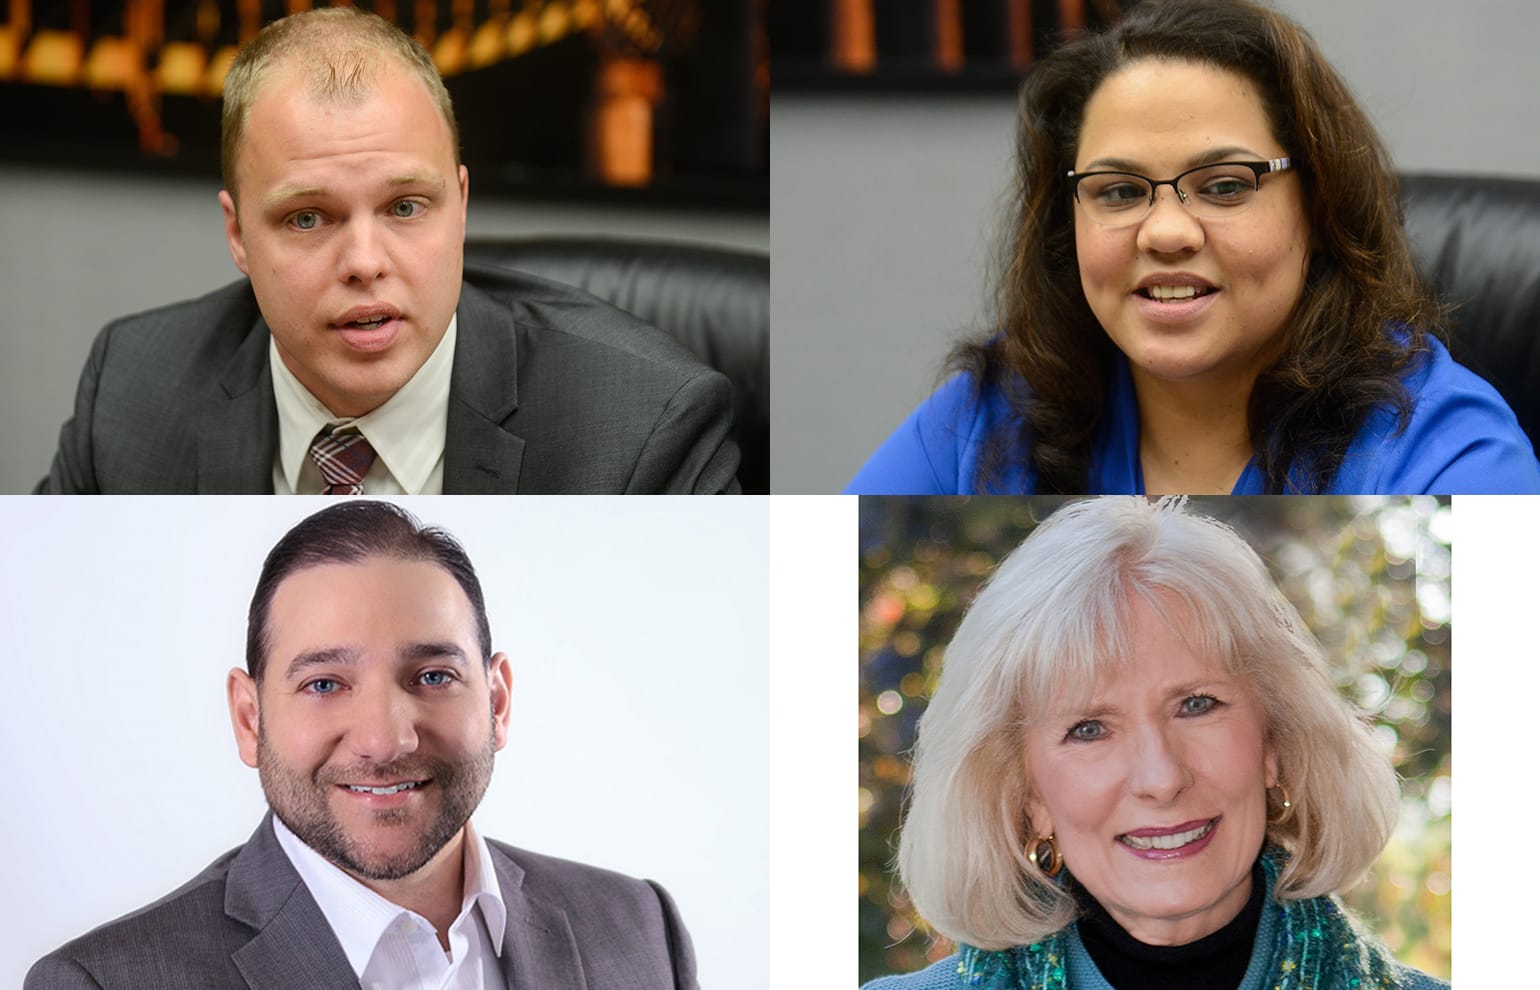 John Blom, top left, Republican candidate for the District 3 position on the Clark County council, has raised $60,393 for his campaign as of mid-October 2016, according to filings with the state's Public Disclosure Commission, more than any other candidate seeking a seat on the county council this fall. Tanisha Harris, top right, his Democratic opponent, is just behind at $55,574.